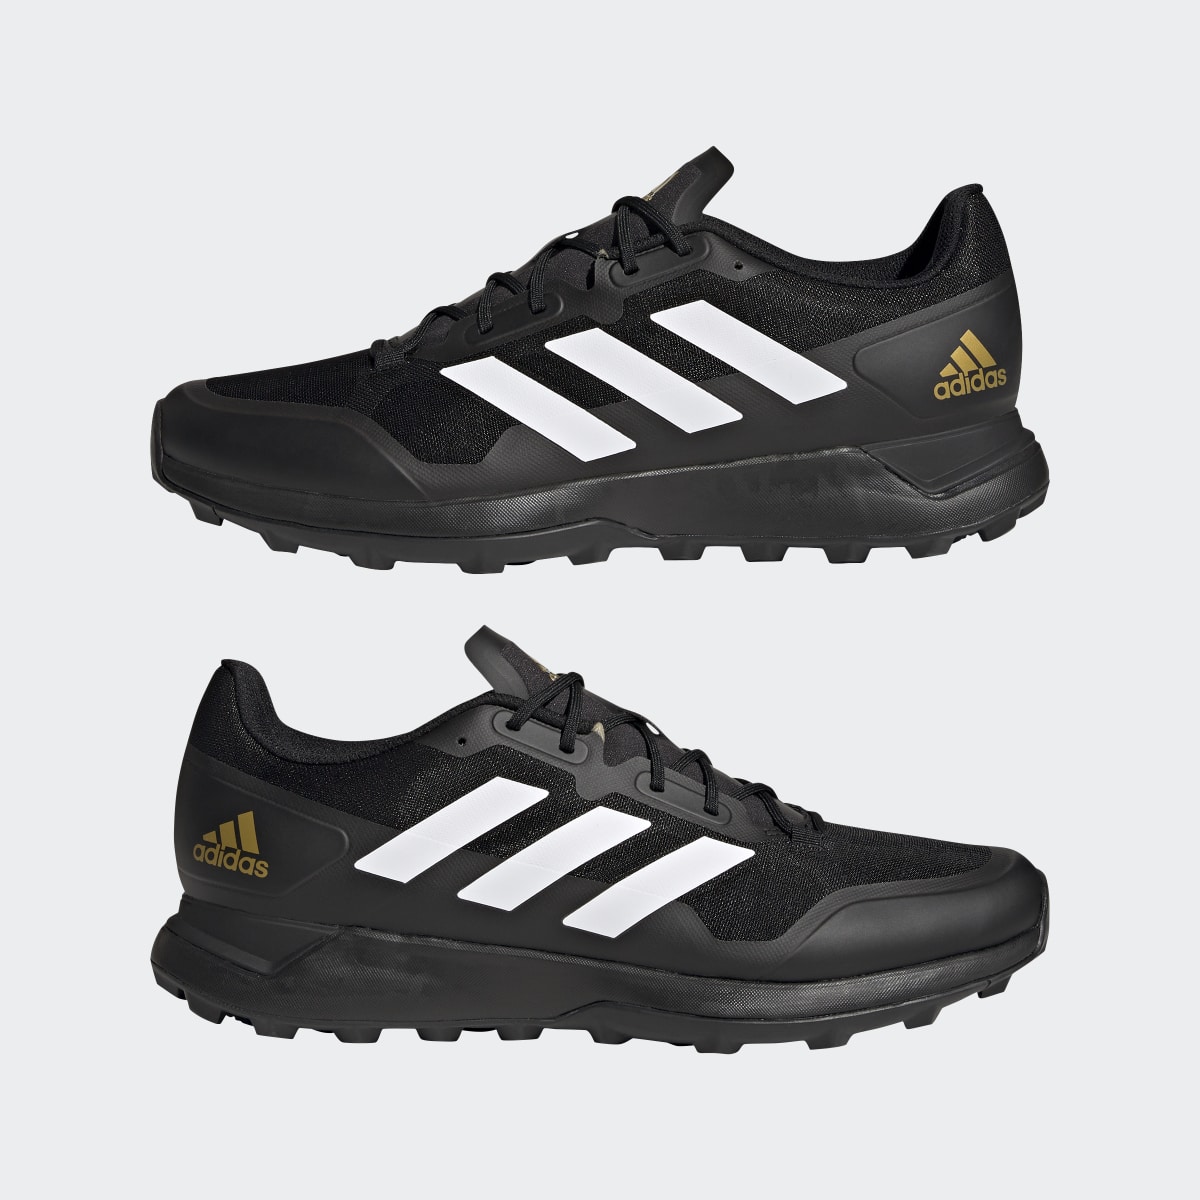 Adidas Zone Dox 2.2 S Boots. 8